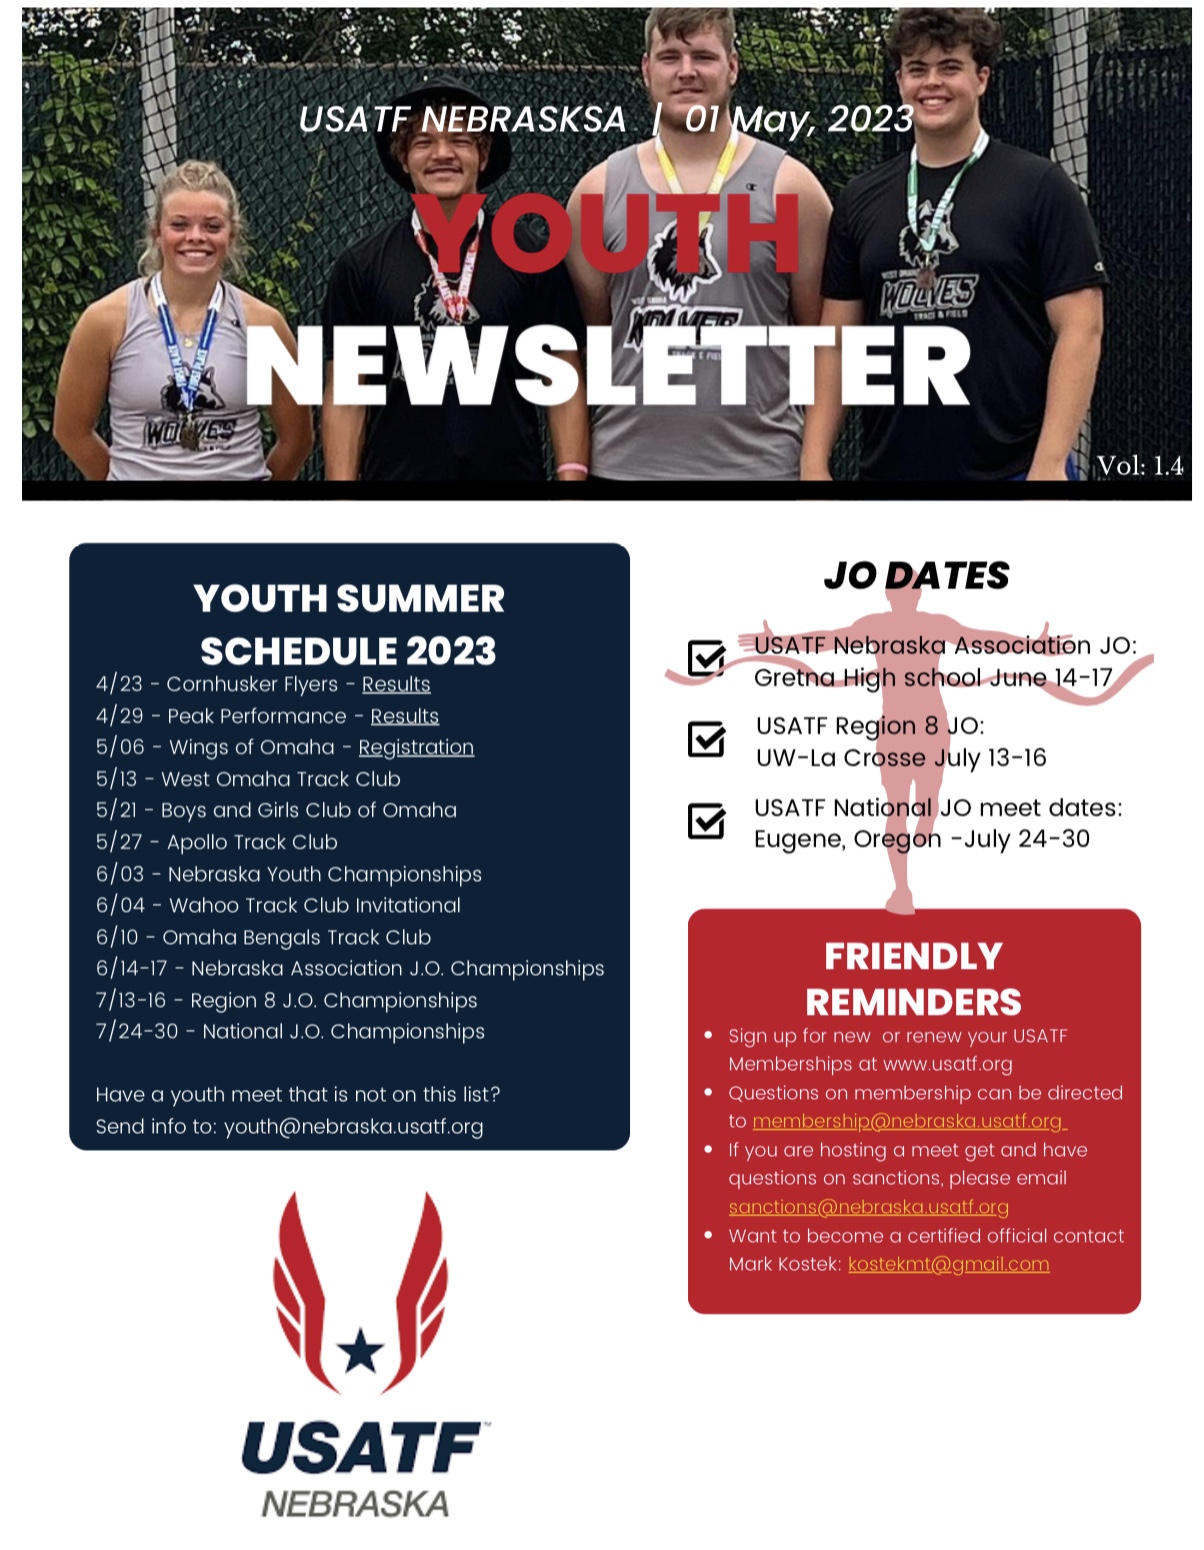 The May 2023 Youth Newsletter is now online!